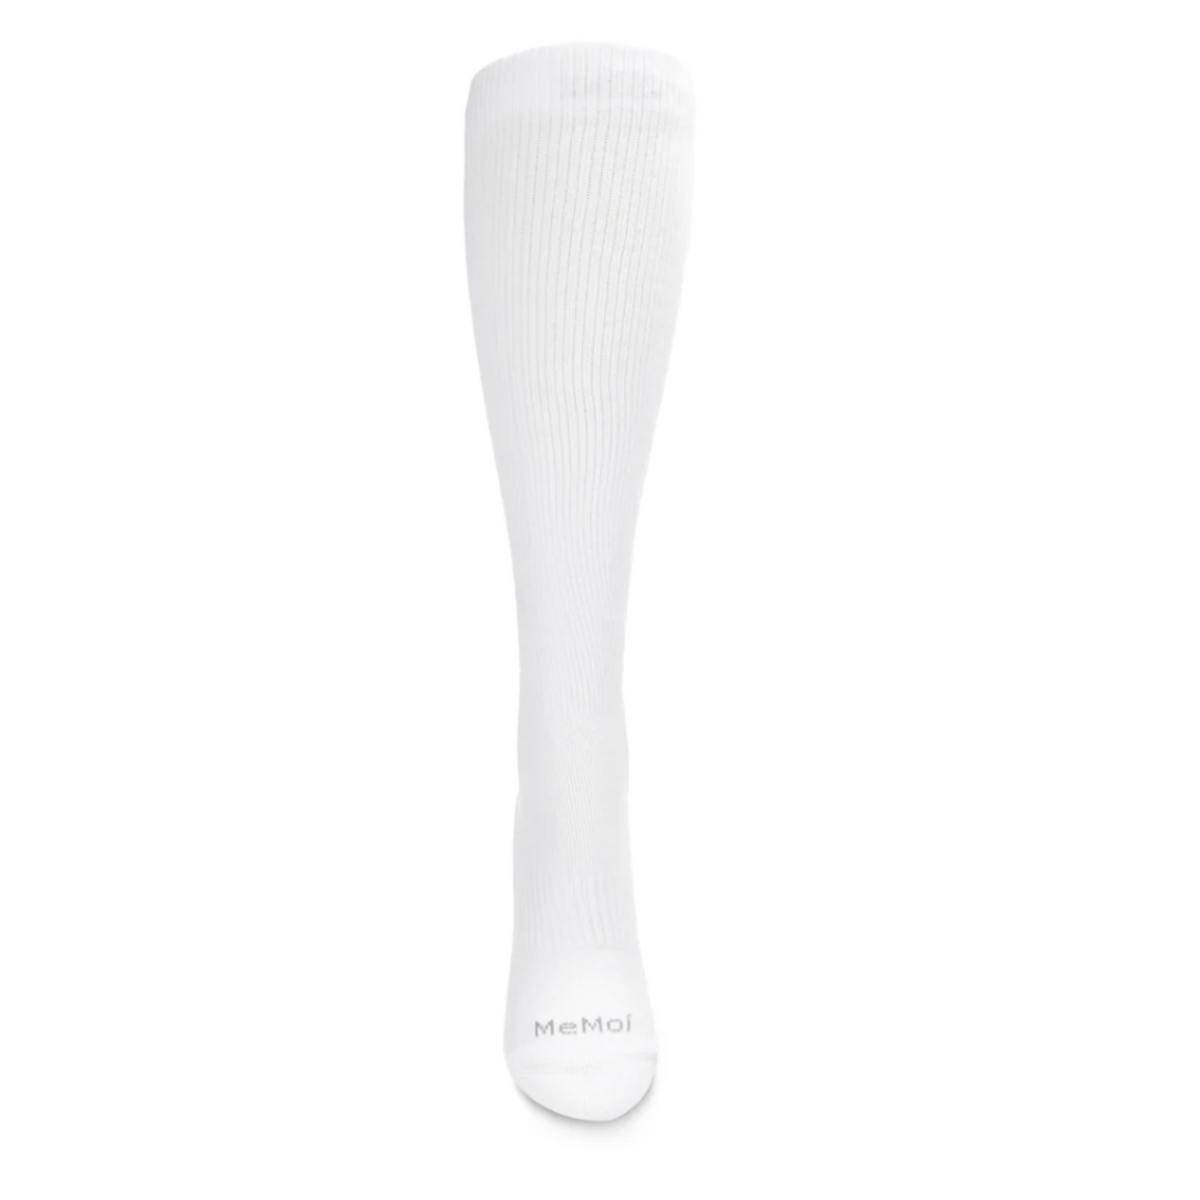 MeMoi Classic Athletic Cushion Sole Cotton Moderate Graduated Compression in white from front